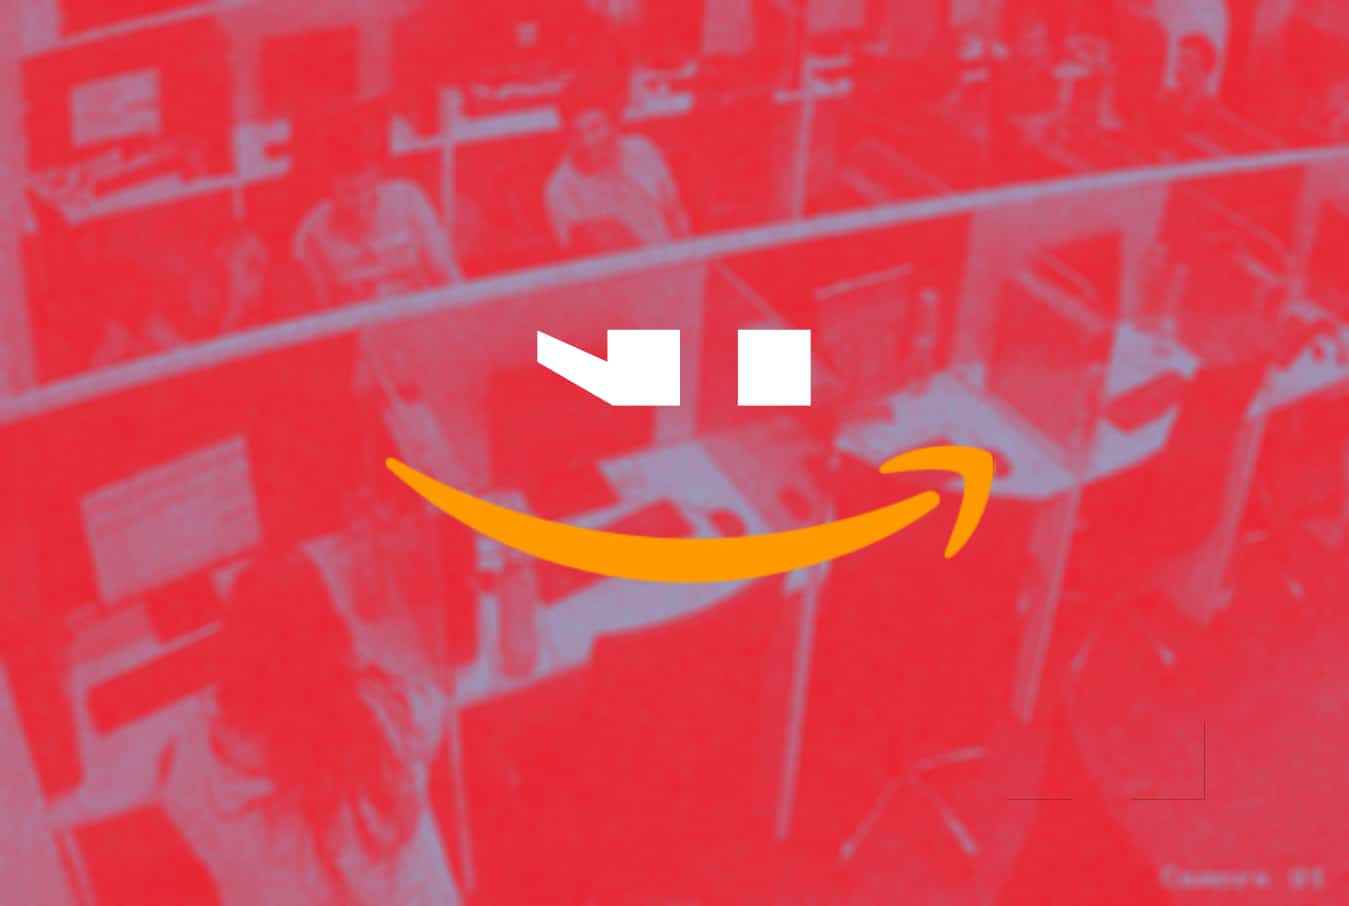 Seized: Indian call center running Amazon account hacking scam against US citizens